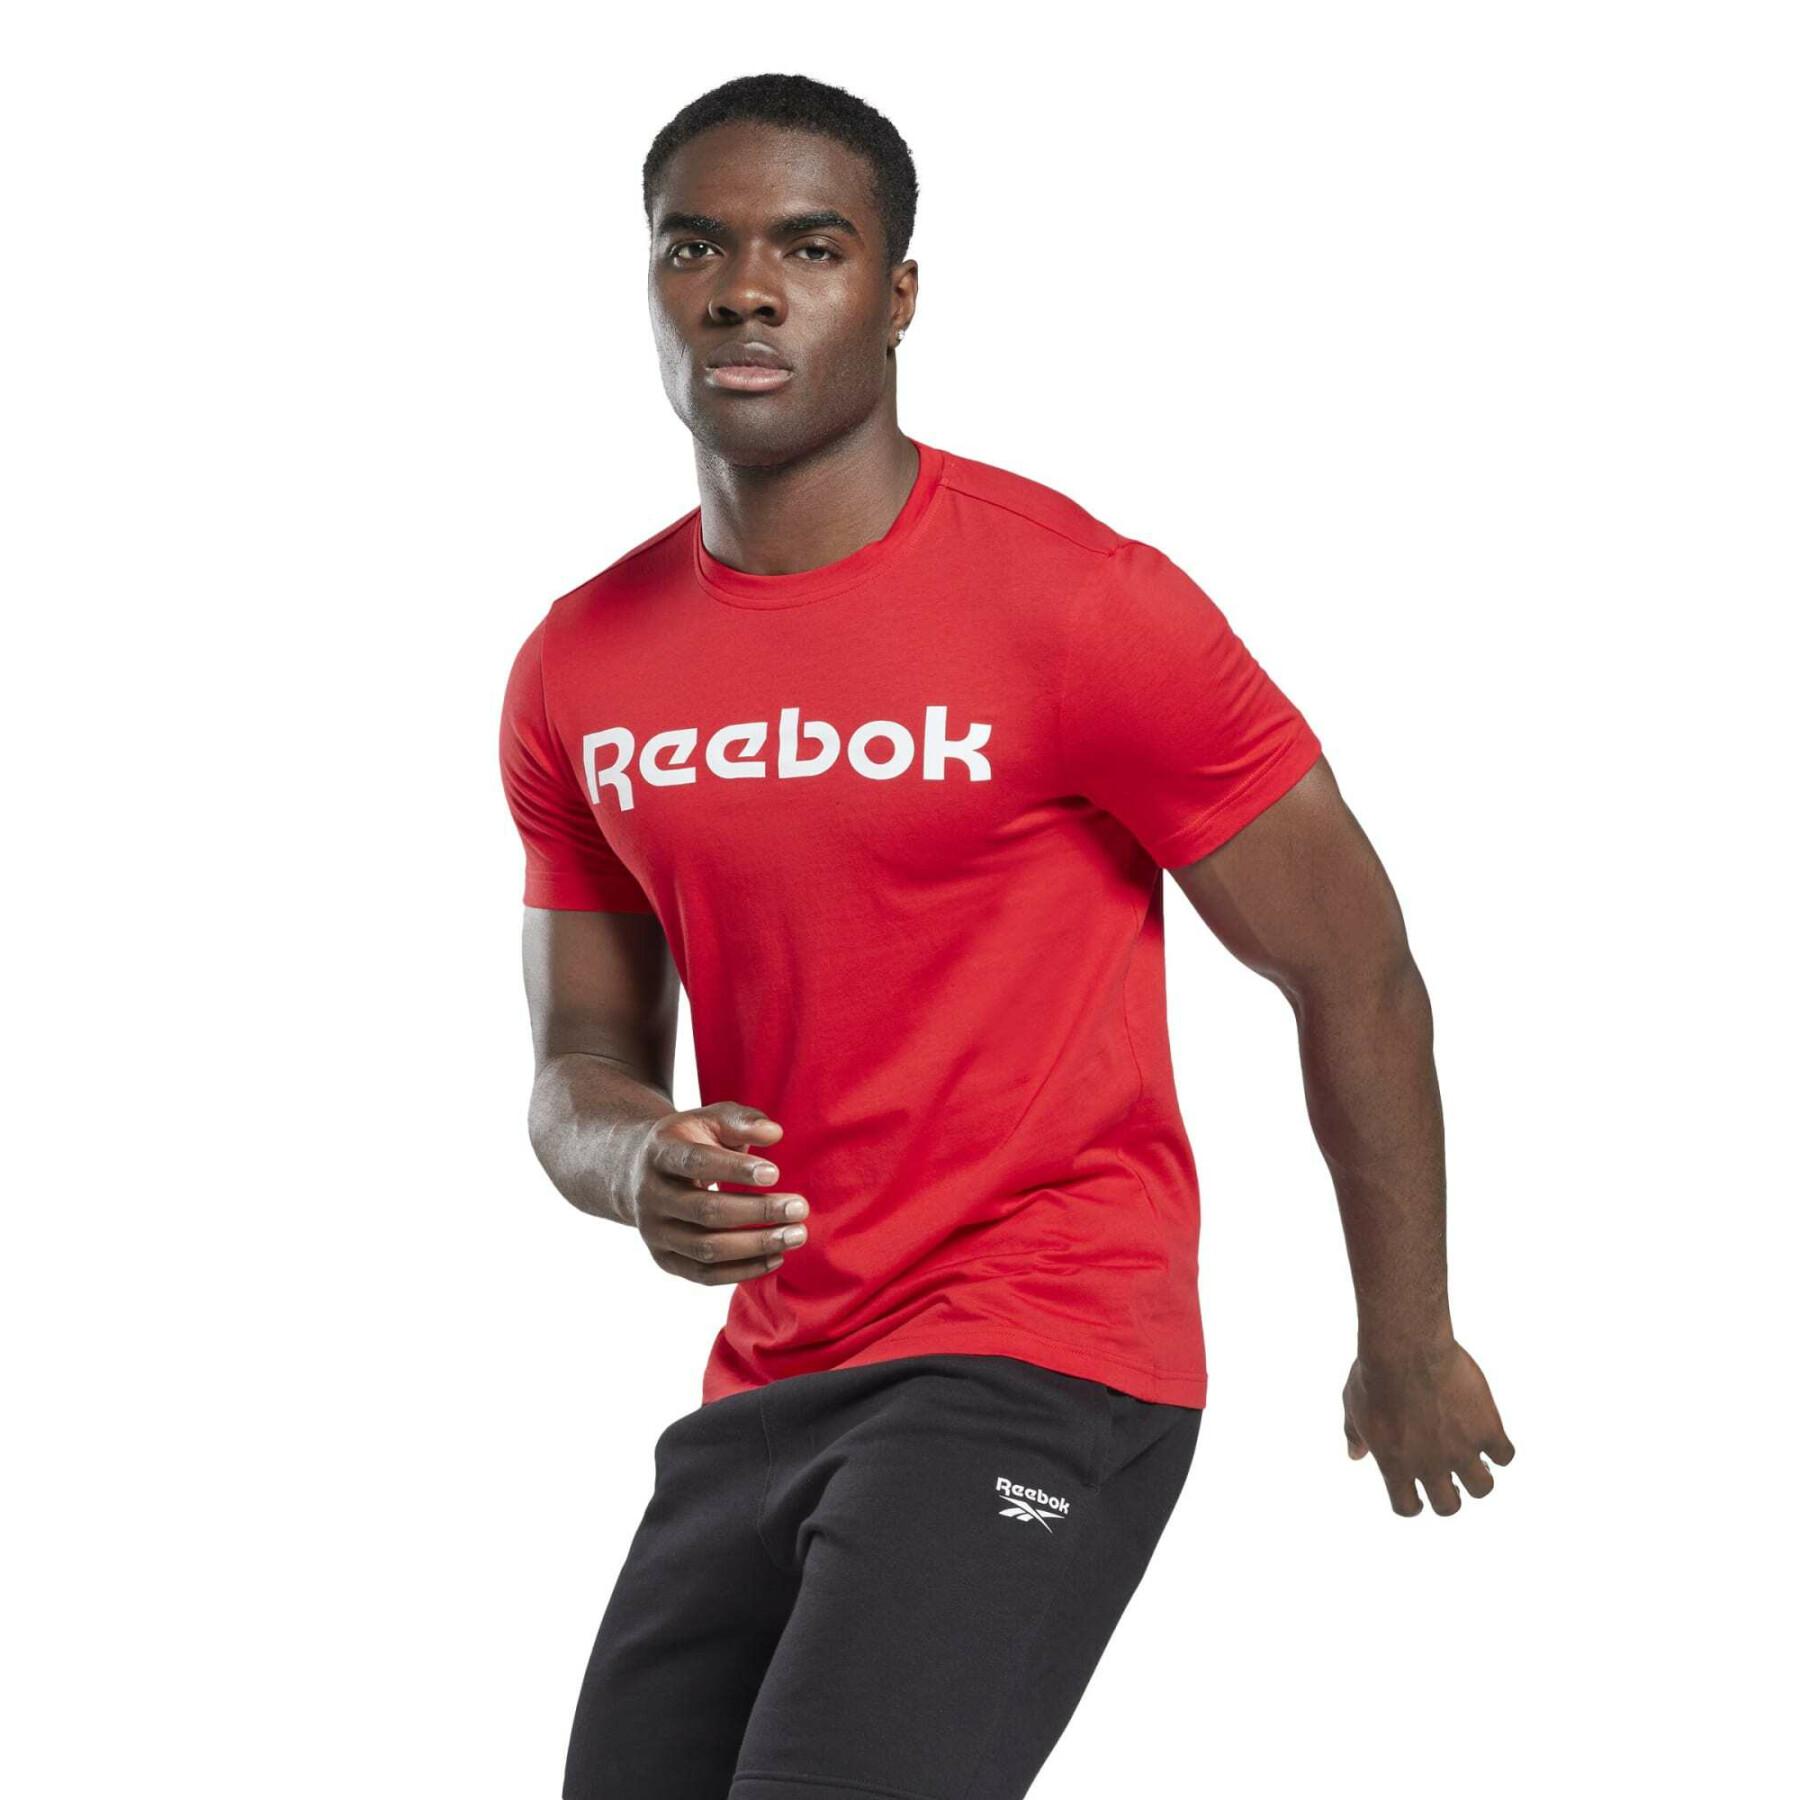 Graphic series T-shirt with linear logo Reebok - T-shirts - Men\'s Clothing  - Fitness